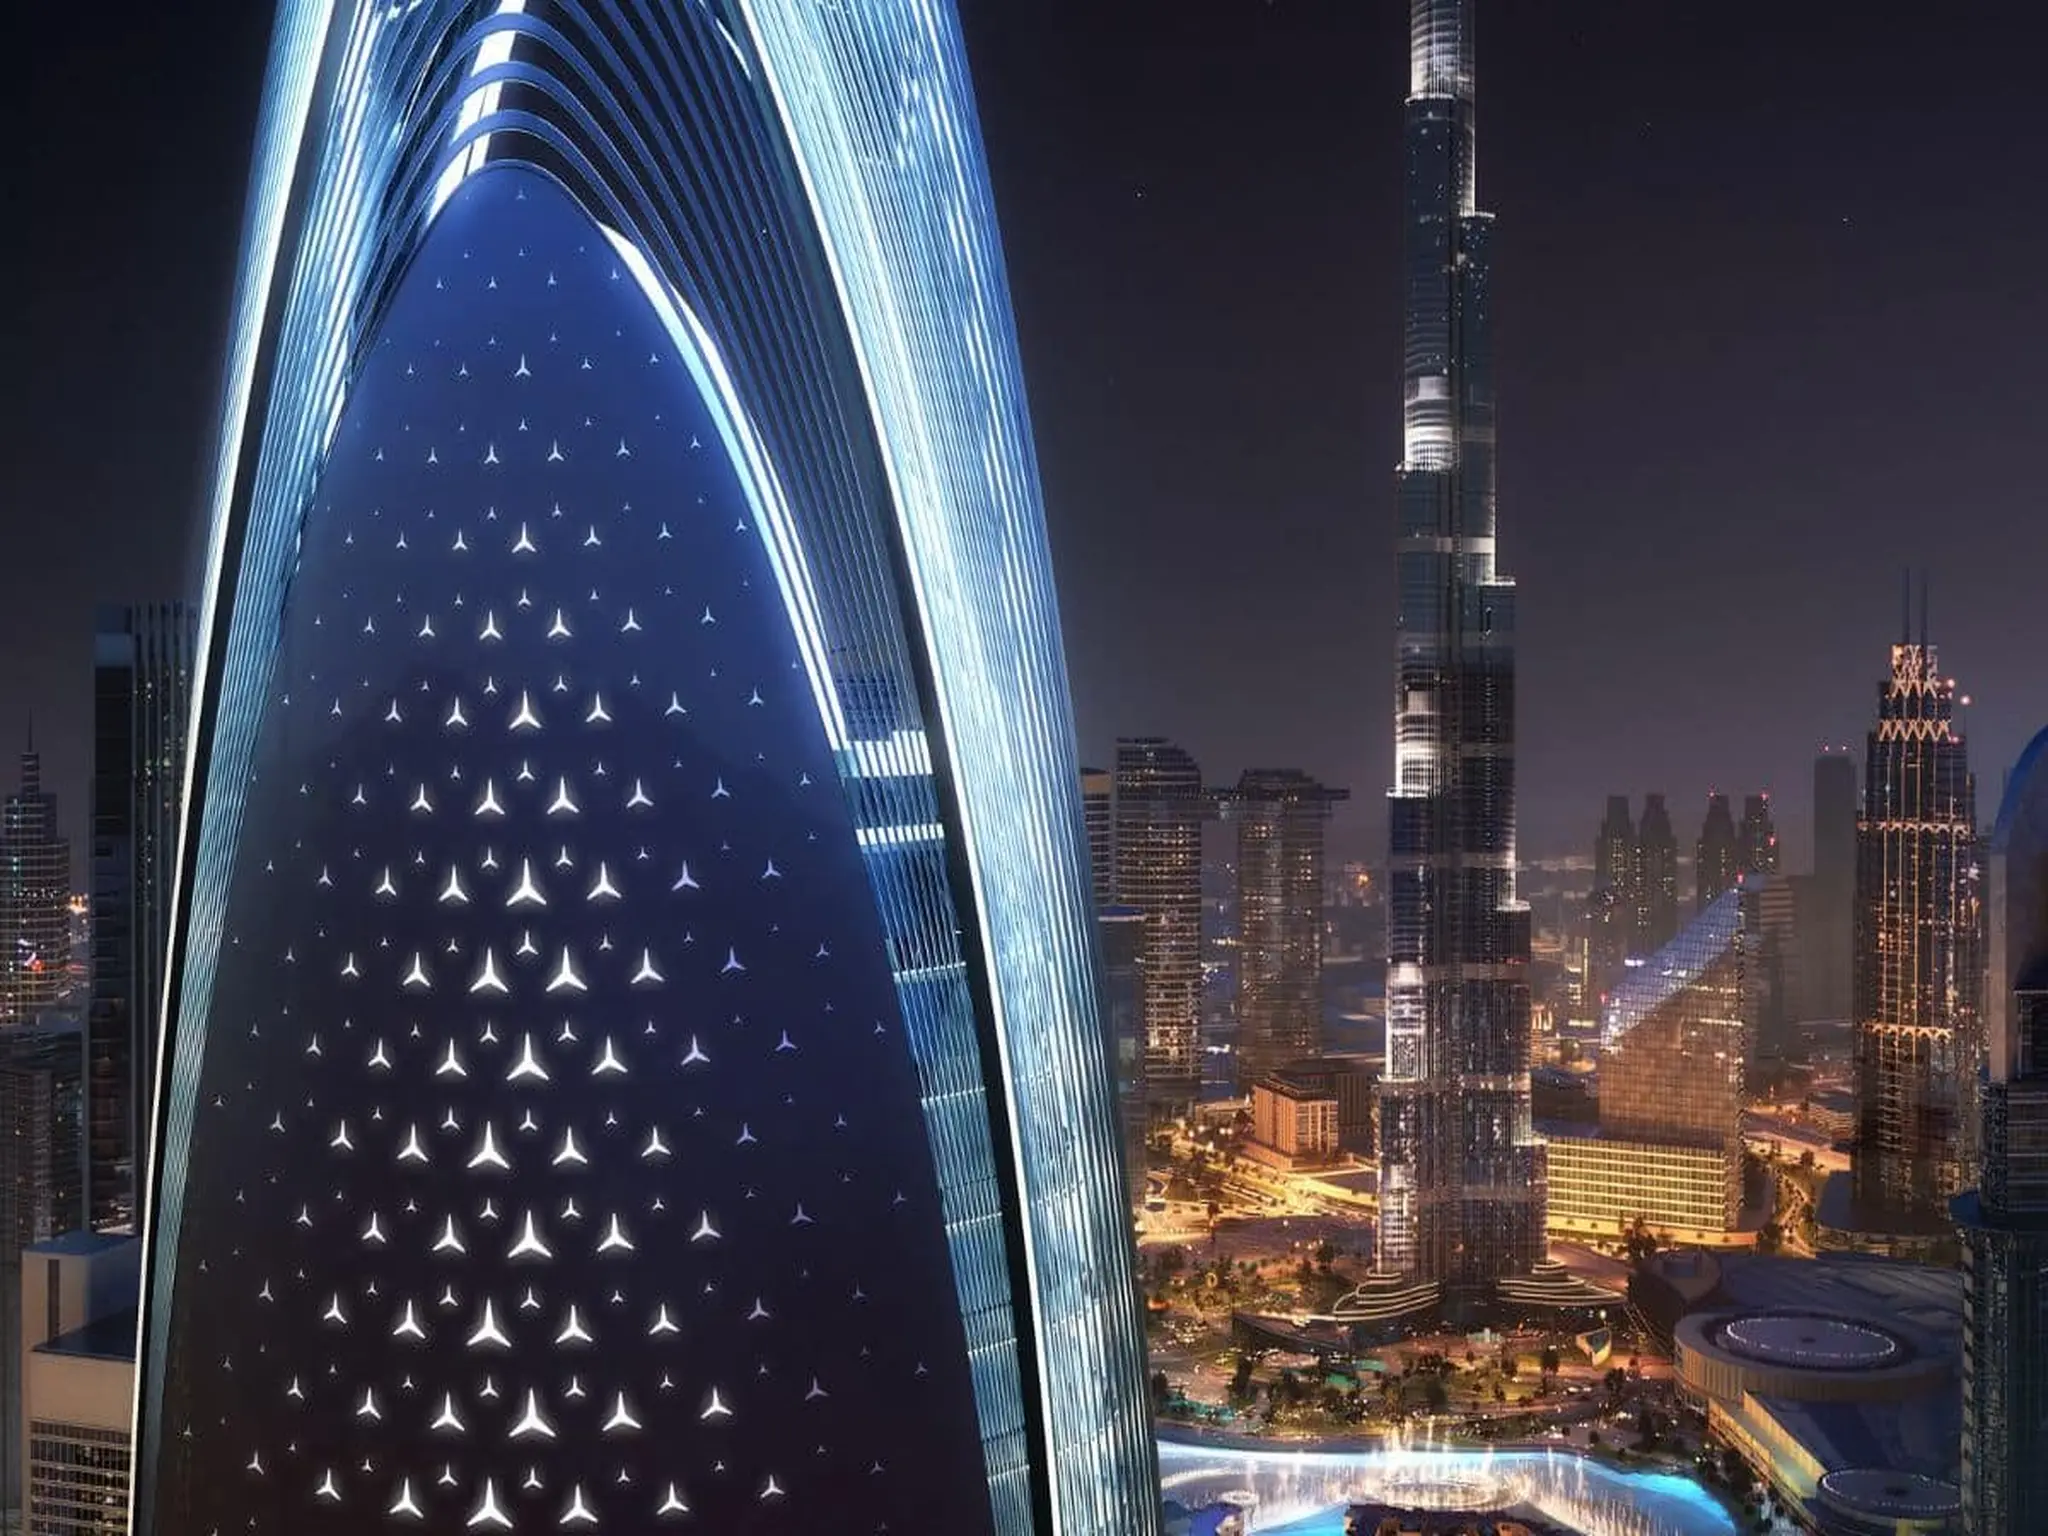 Mercedes is building a giant tower in the UAE